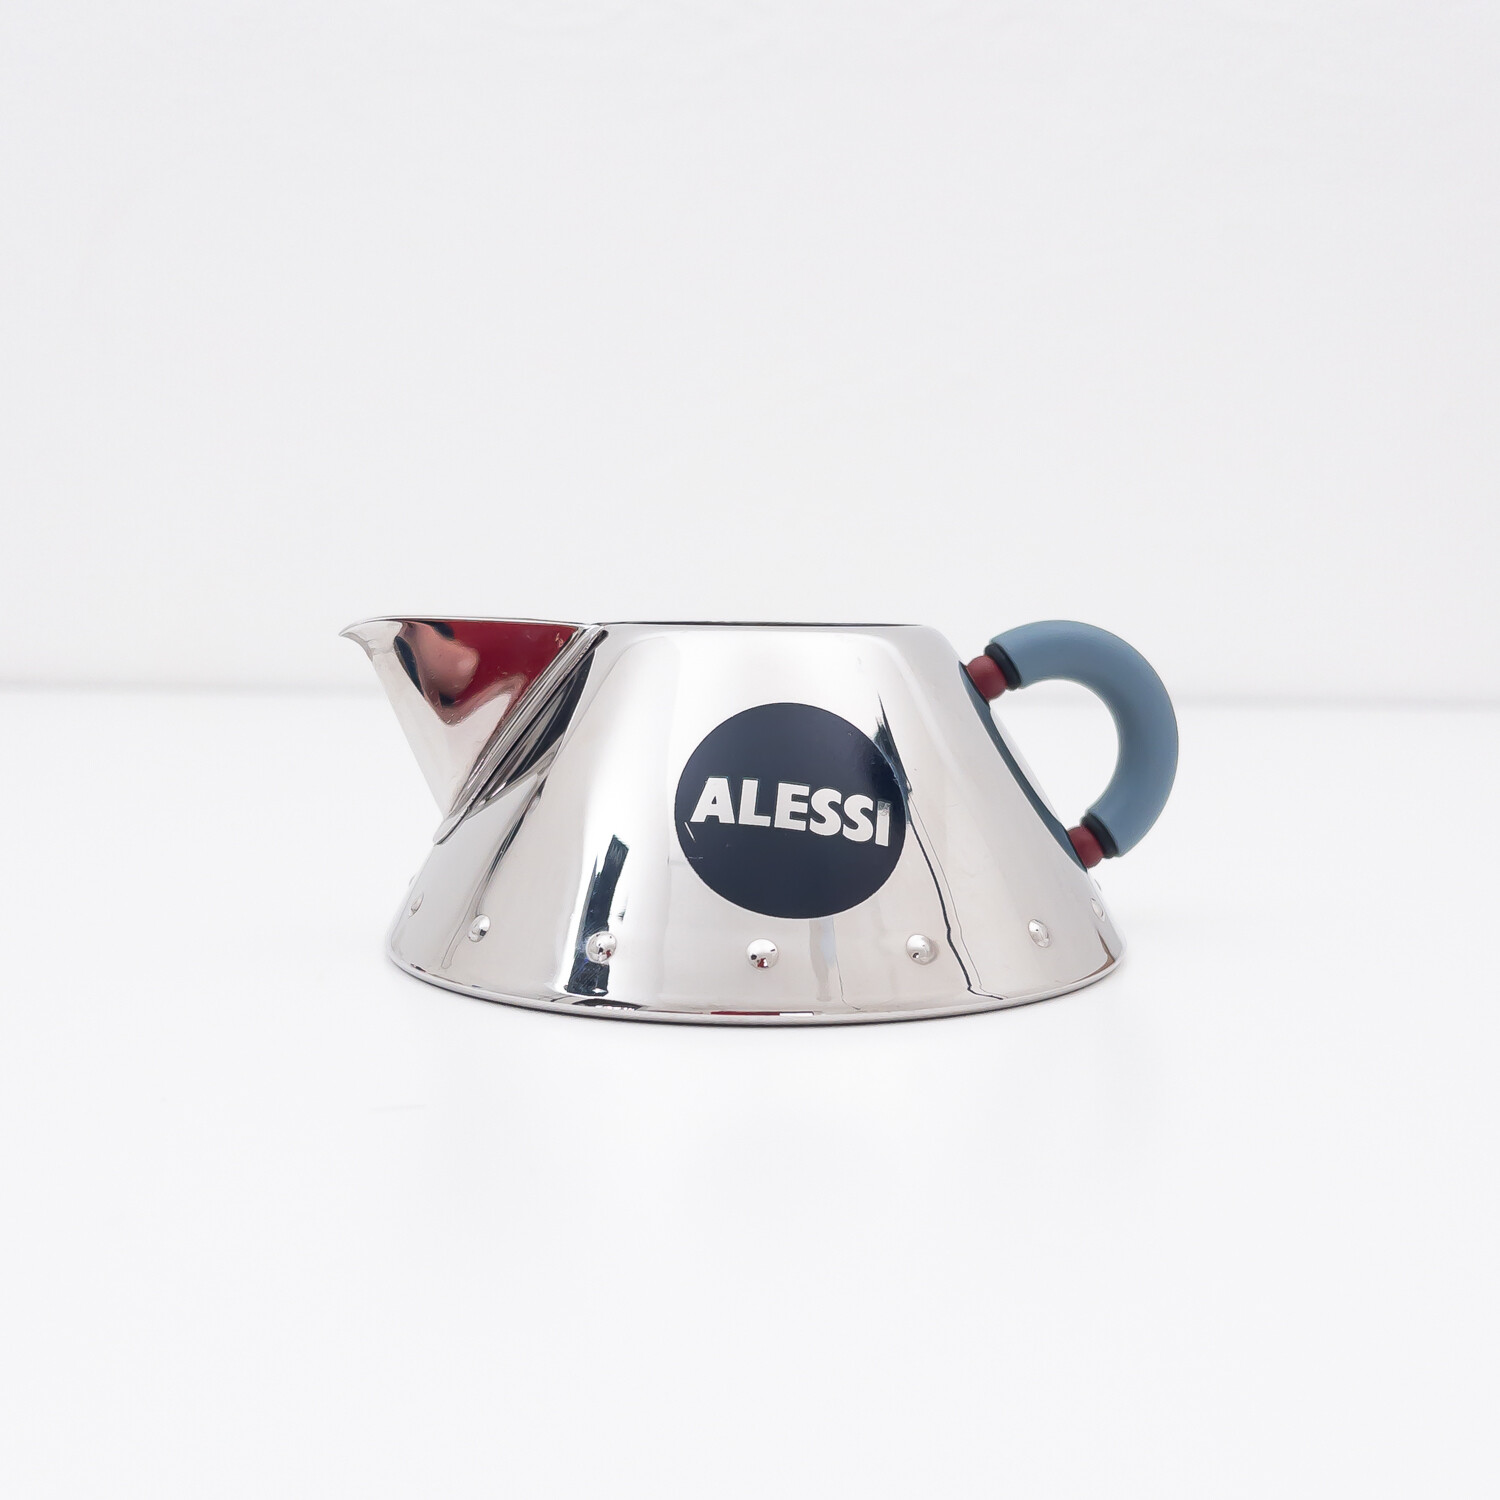 Creamer 9096 by Michael Graves for Alessi